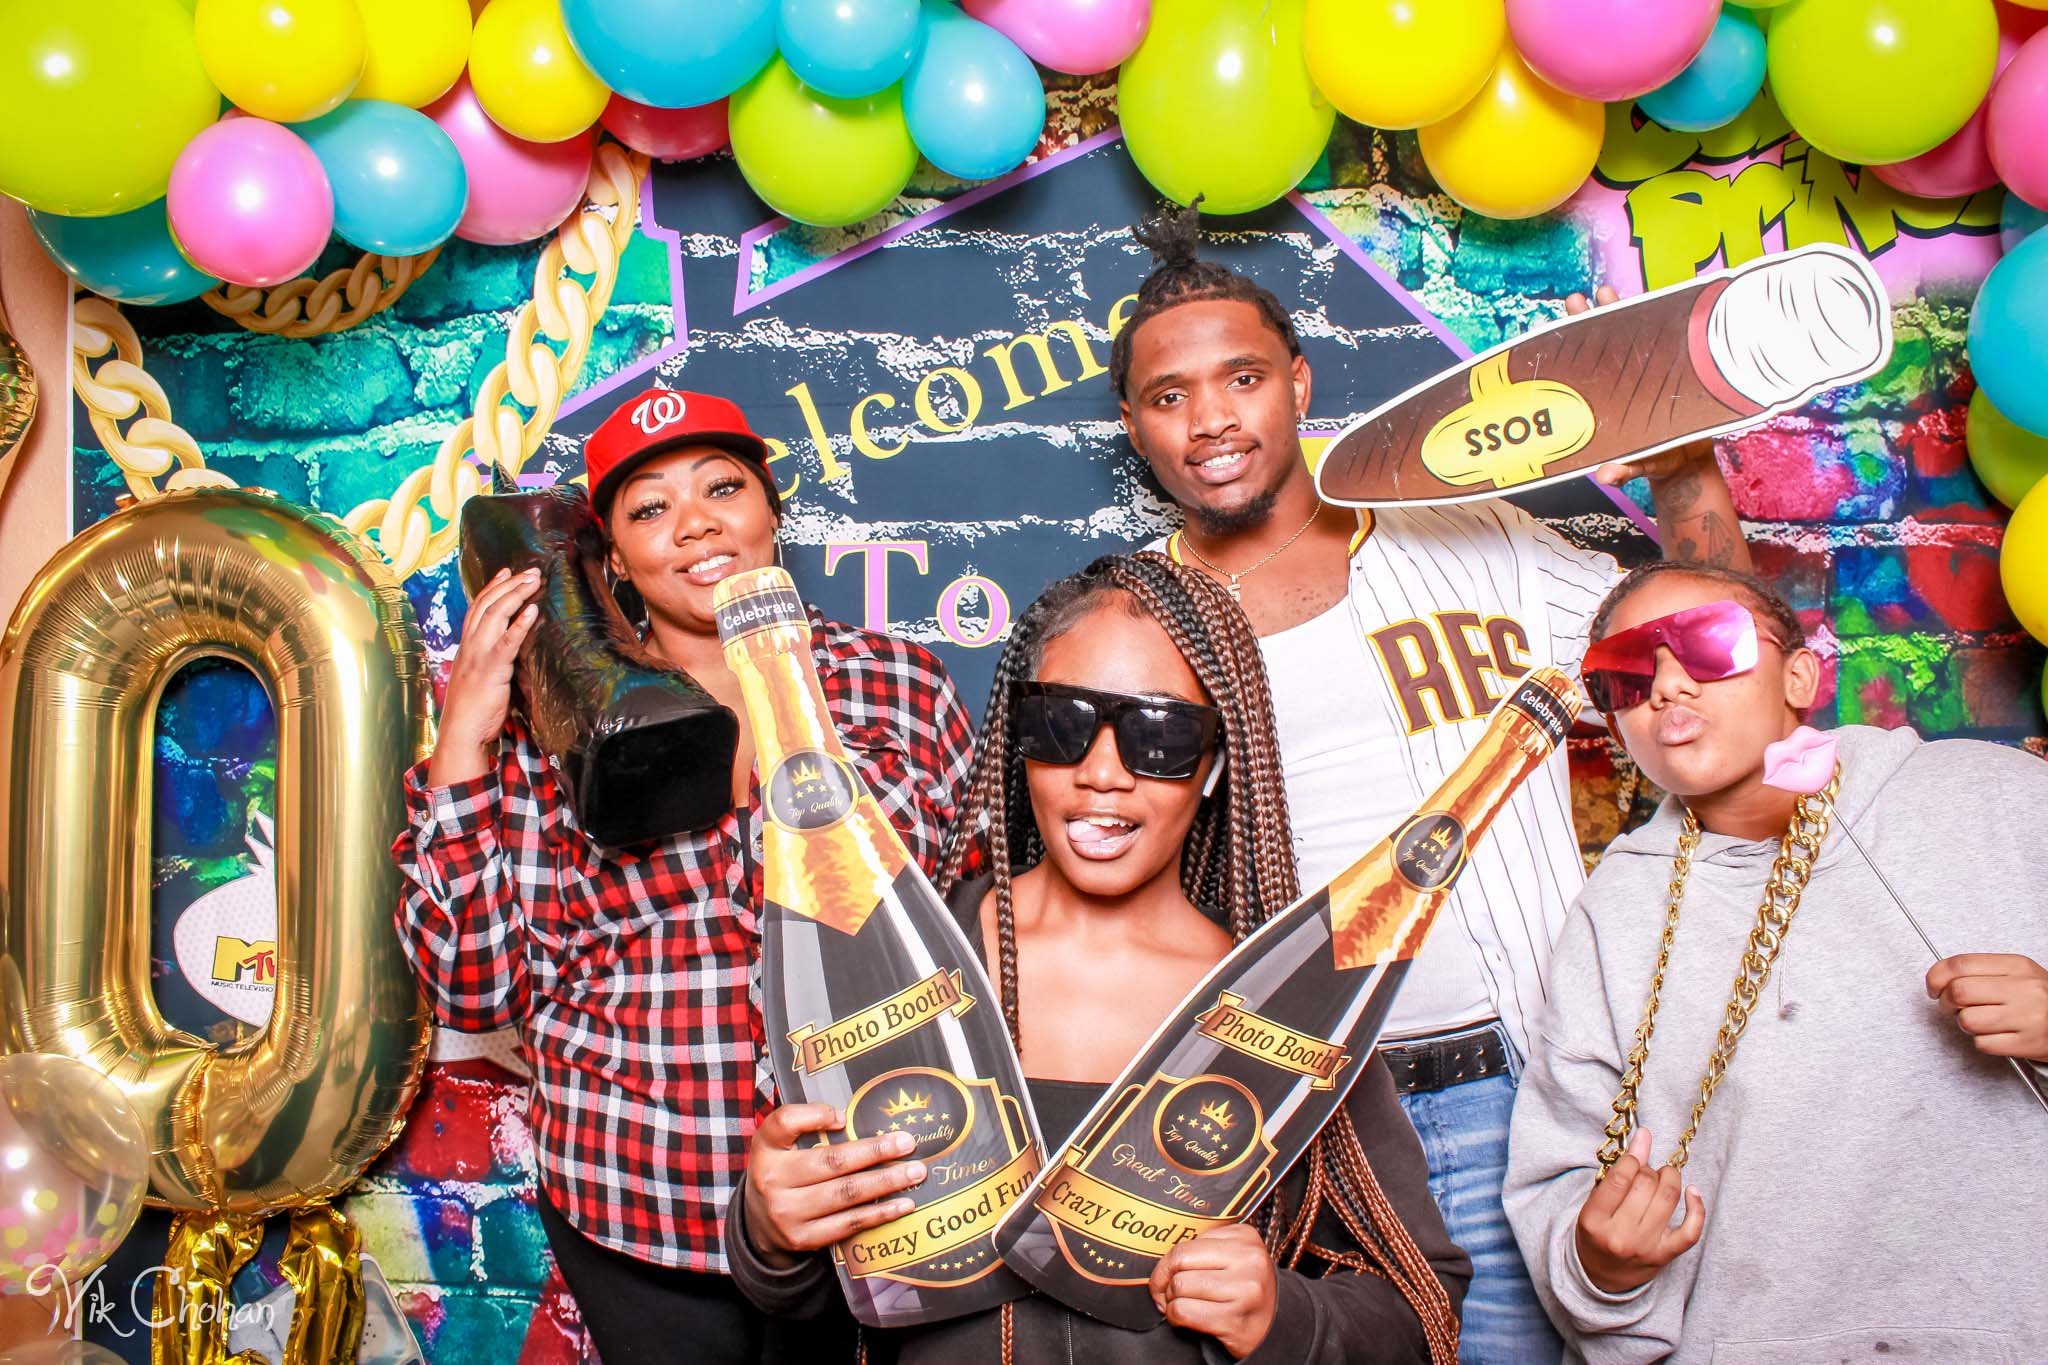 2022-11-26-Fabreonne-40-and-Fabulous-Birthday-House-Party-Photo-Booth-Vik-Chohan-Photography-Photo-Booth-Social-Media-VCP-019.jpg